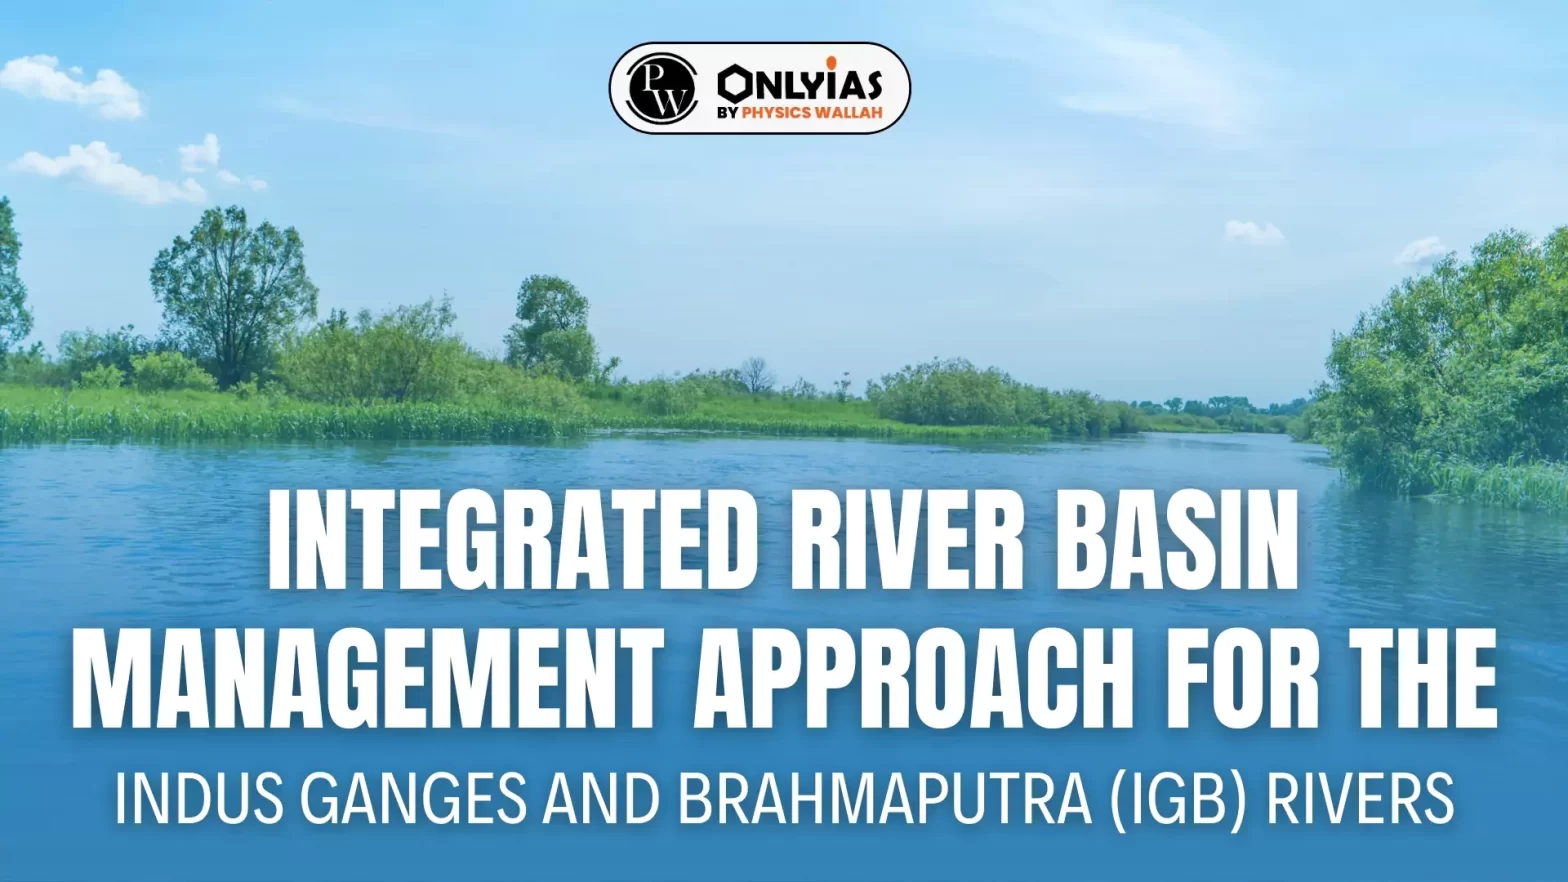 Integrated River Basin Management Approach For The Indus Ganges and Brahmaputra (IGB) Rivers